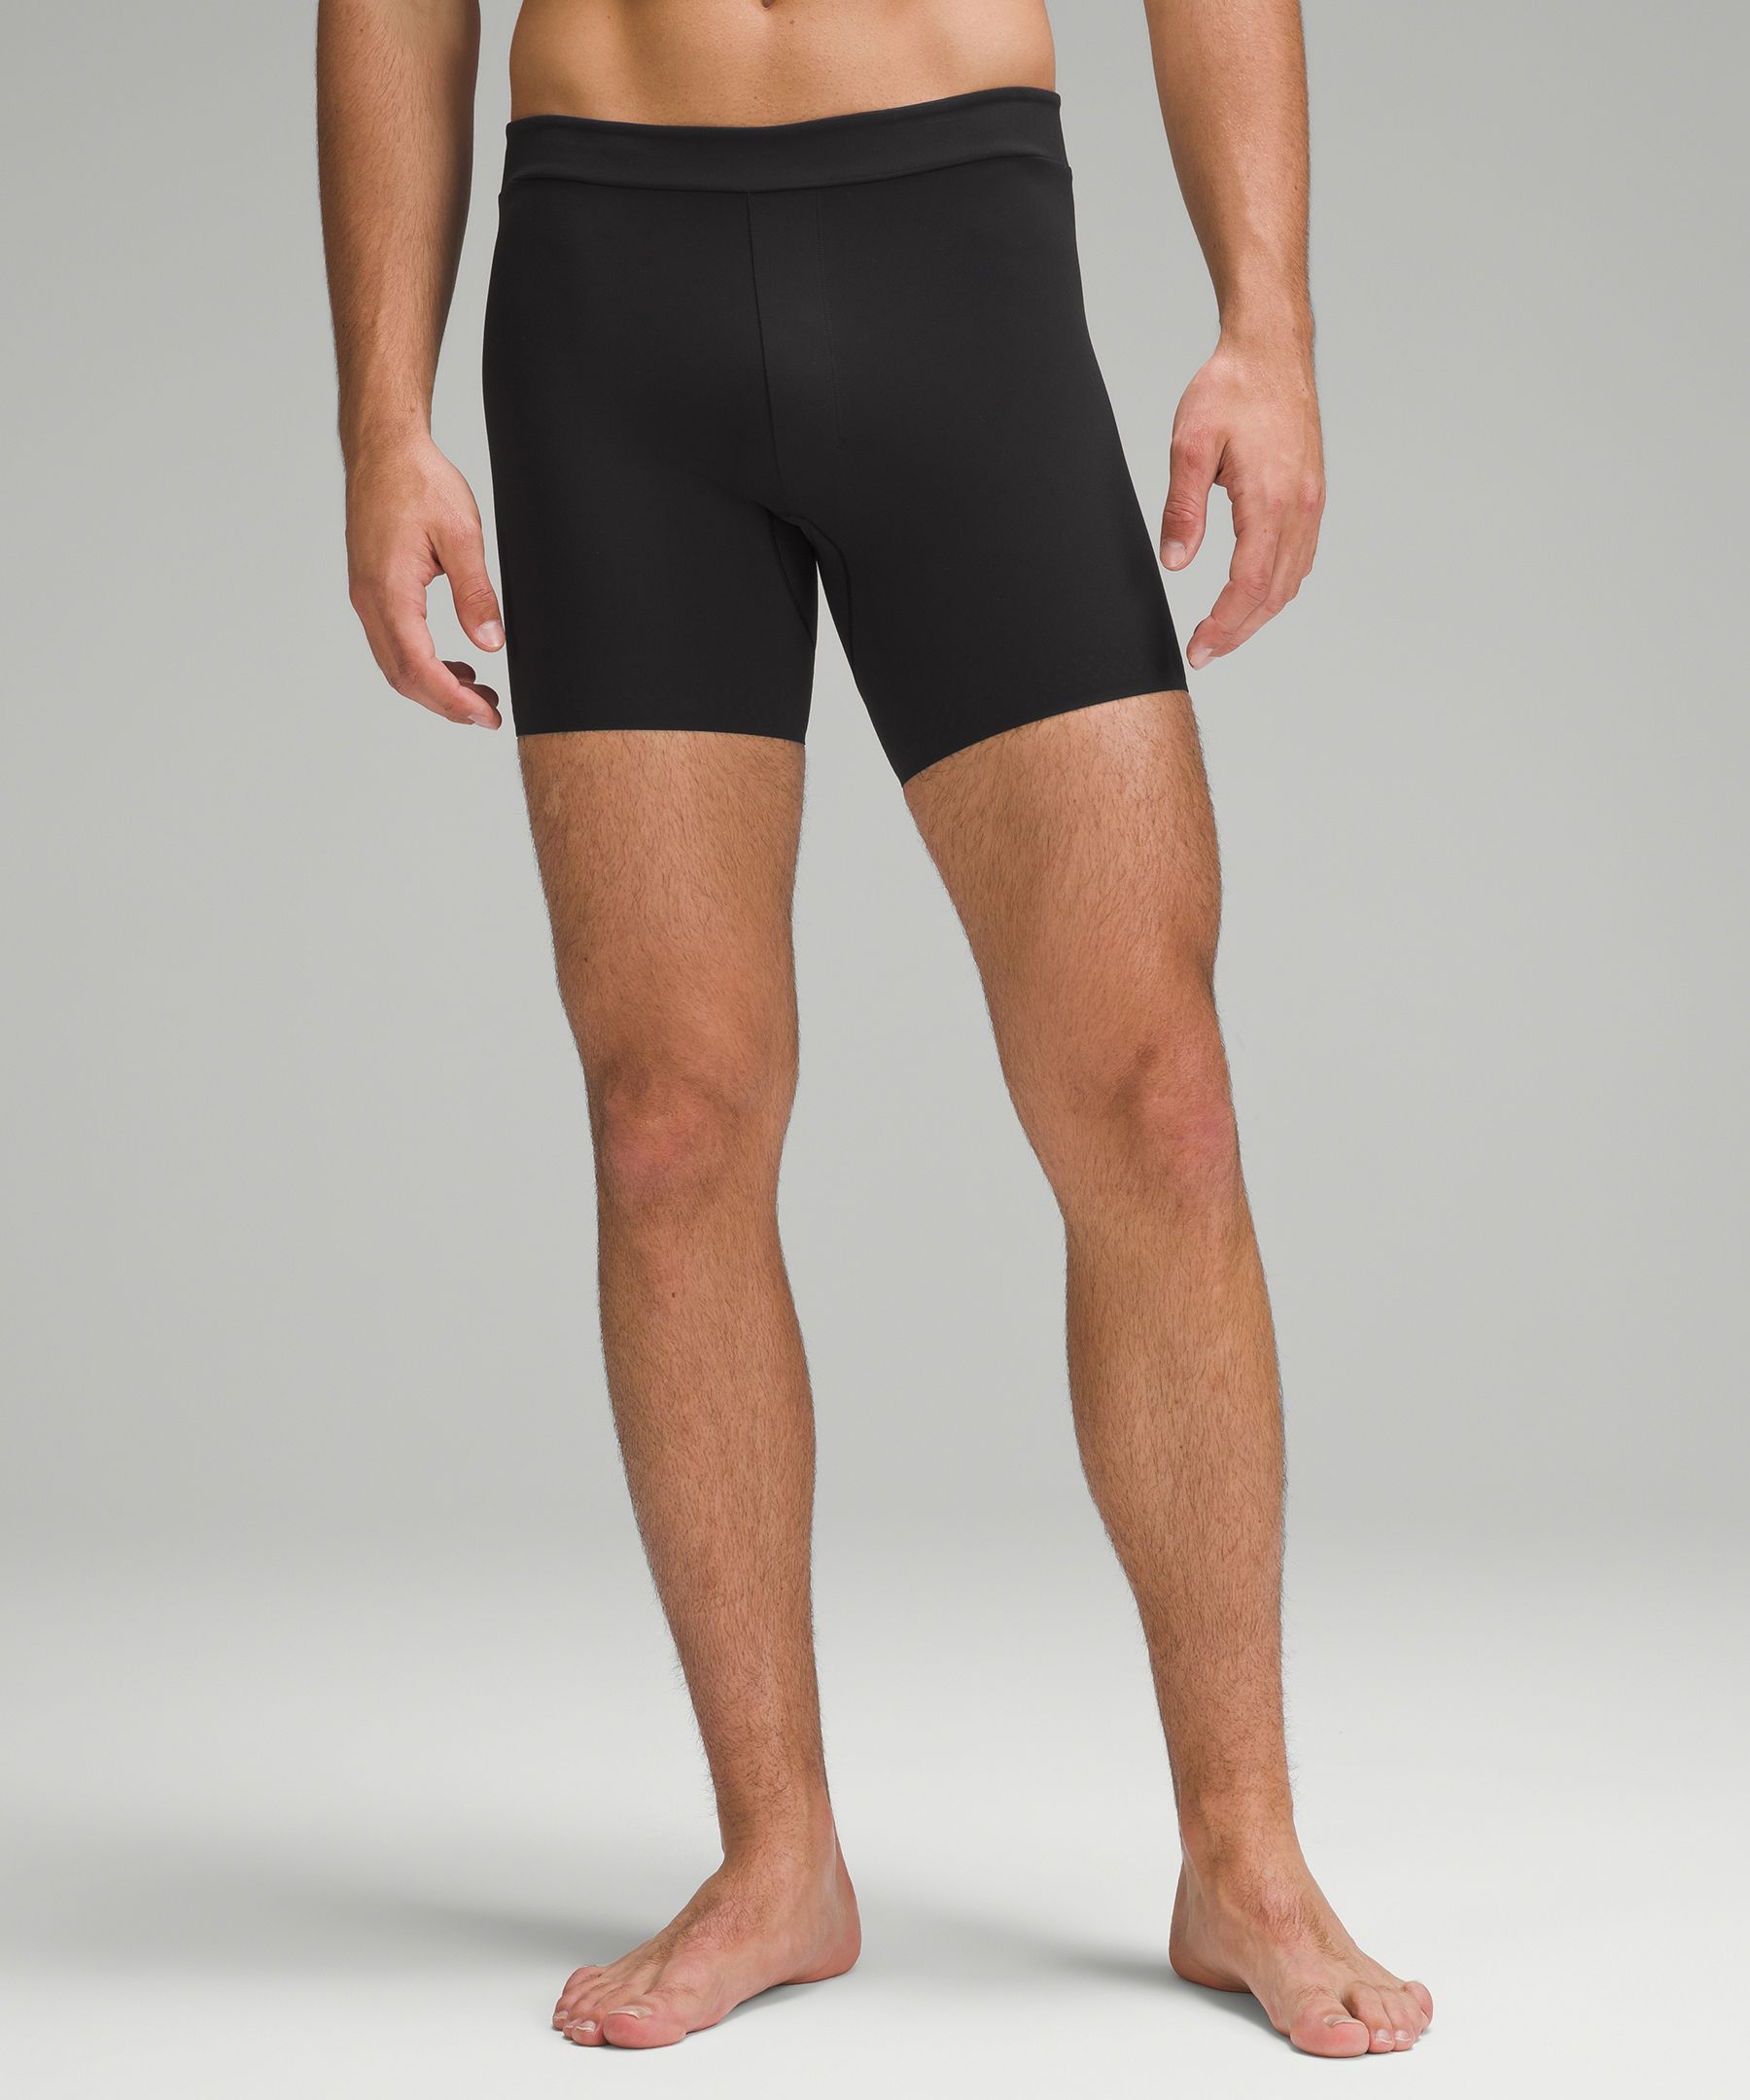 Everyday Yoga Uphold Tribe High Waisted Hot Yoga shorts 1 at  YogaOutlet.com –